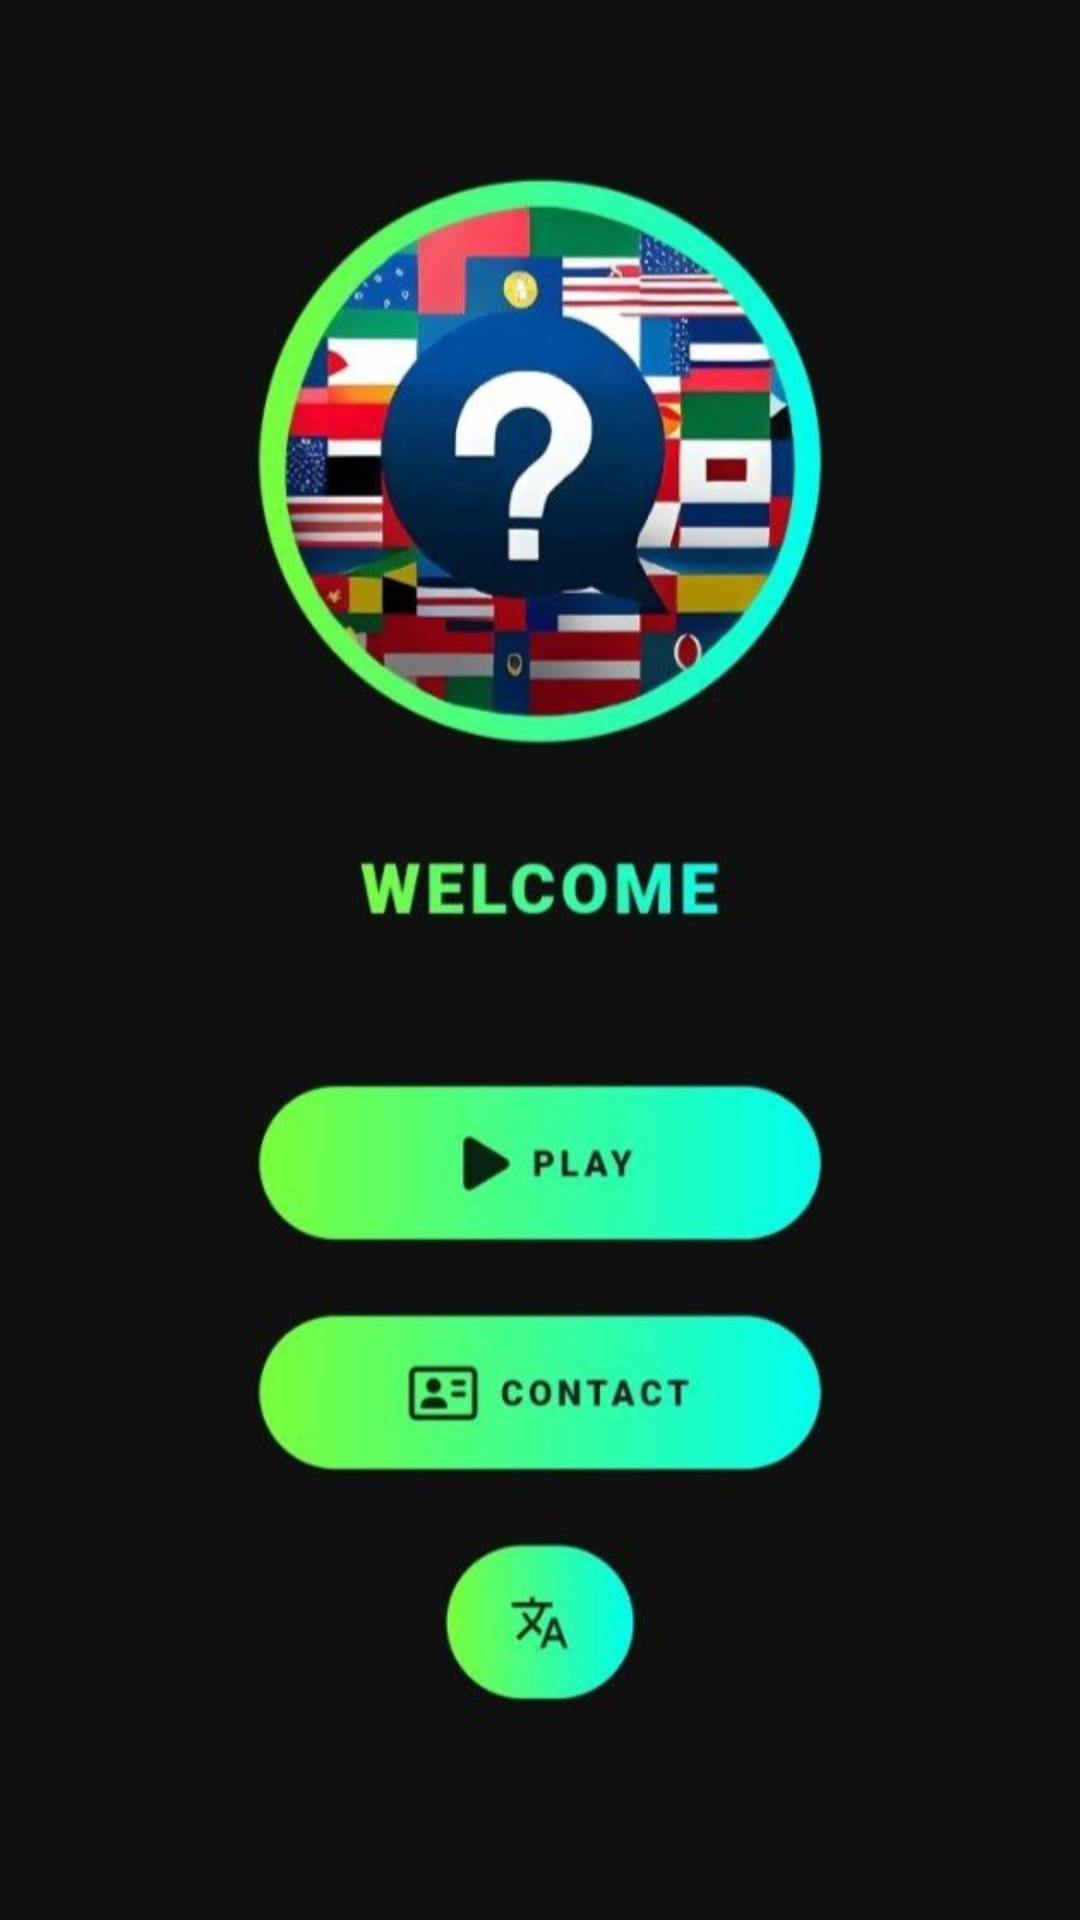 Flag Game for Android - Free App Download